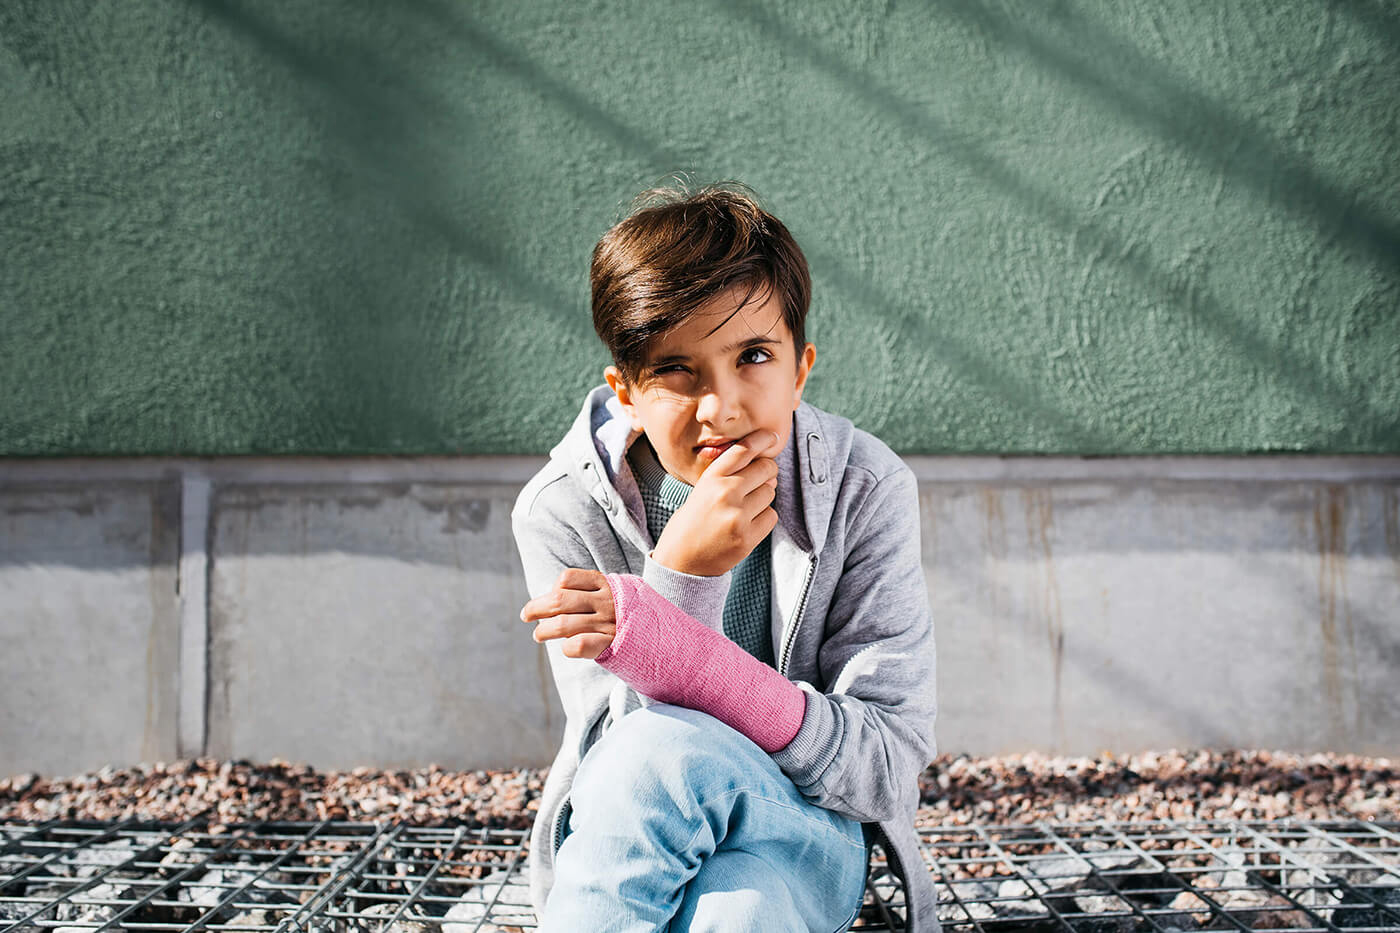 A young boy sitting and thinking with his hand in a cast